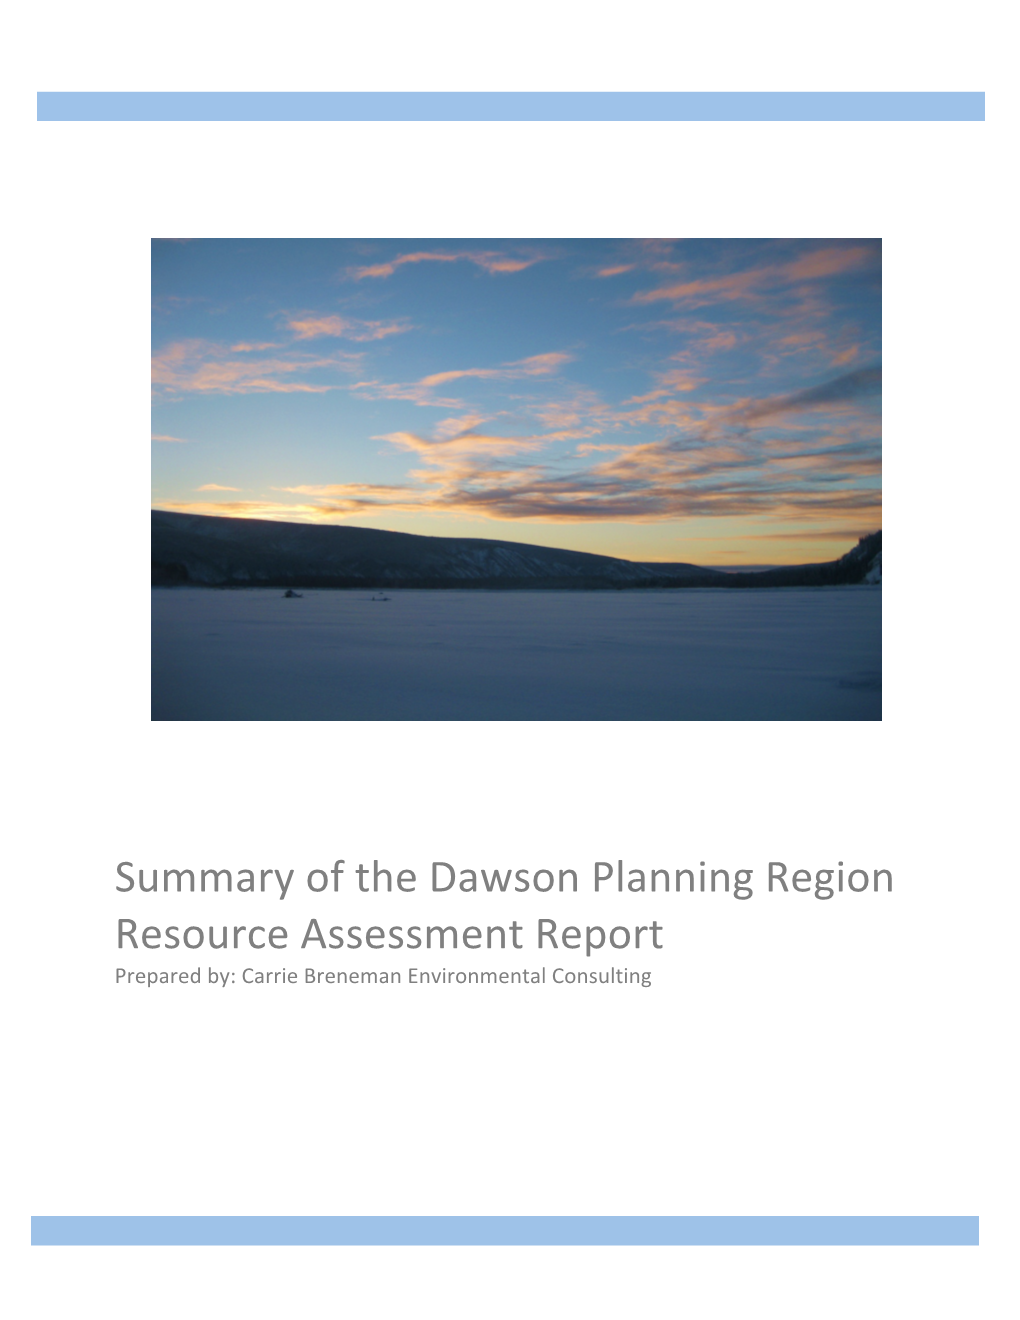 Summary of the Dawson Planning Region Resource Assessment Report Prepared By: Carrie Breneman Environmental Consulting